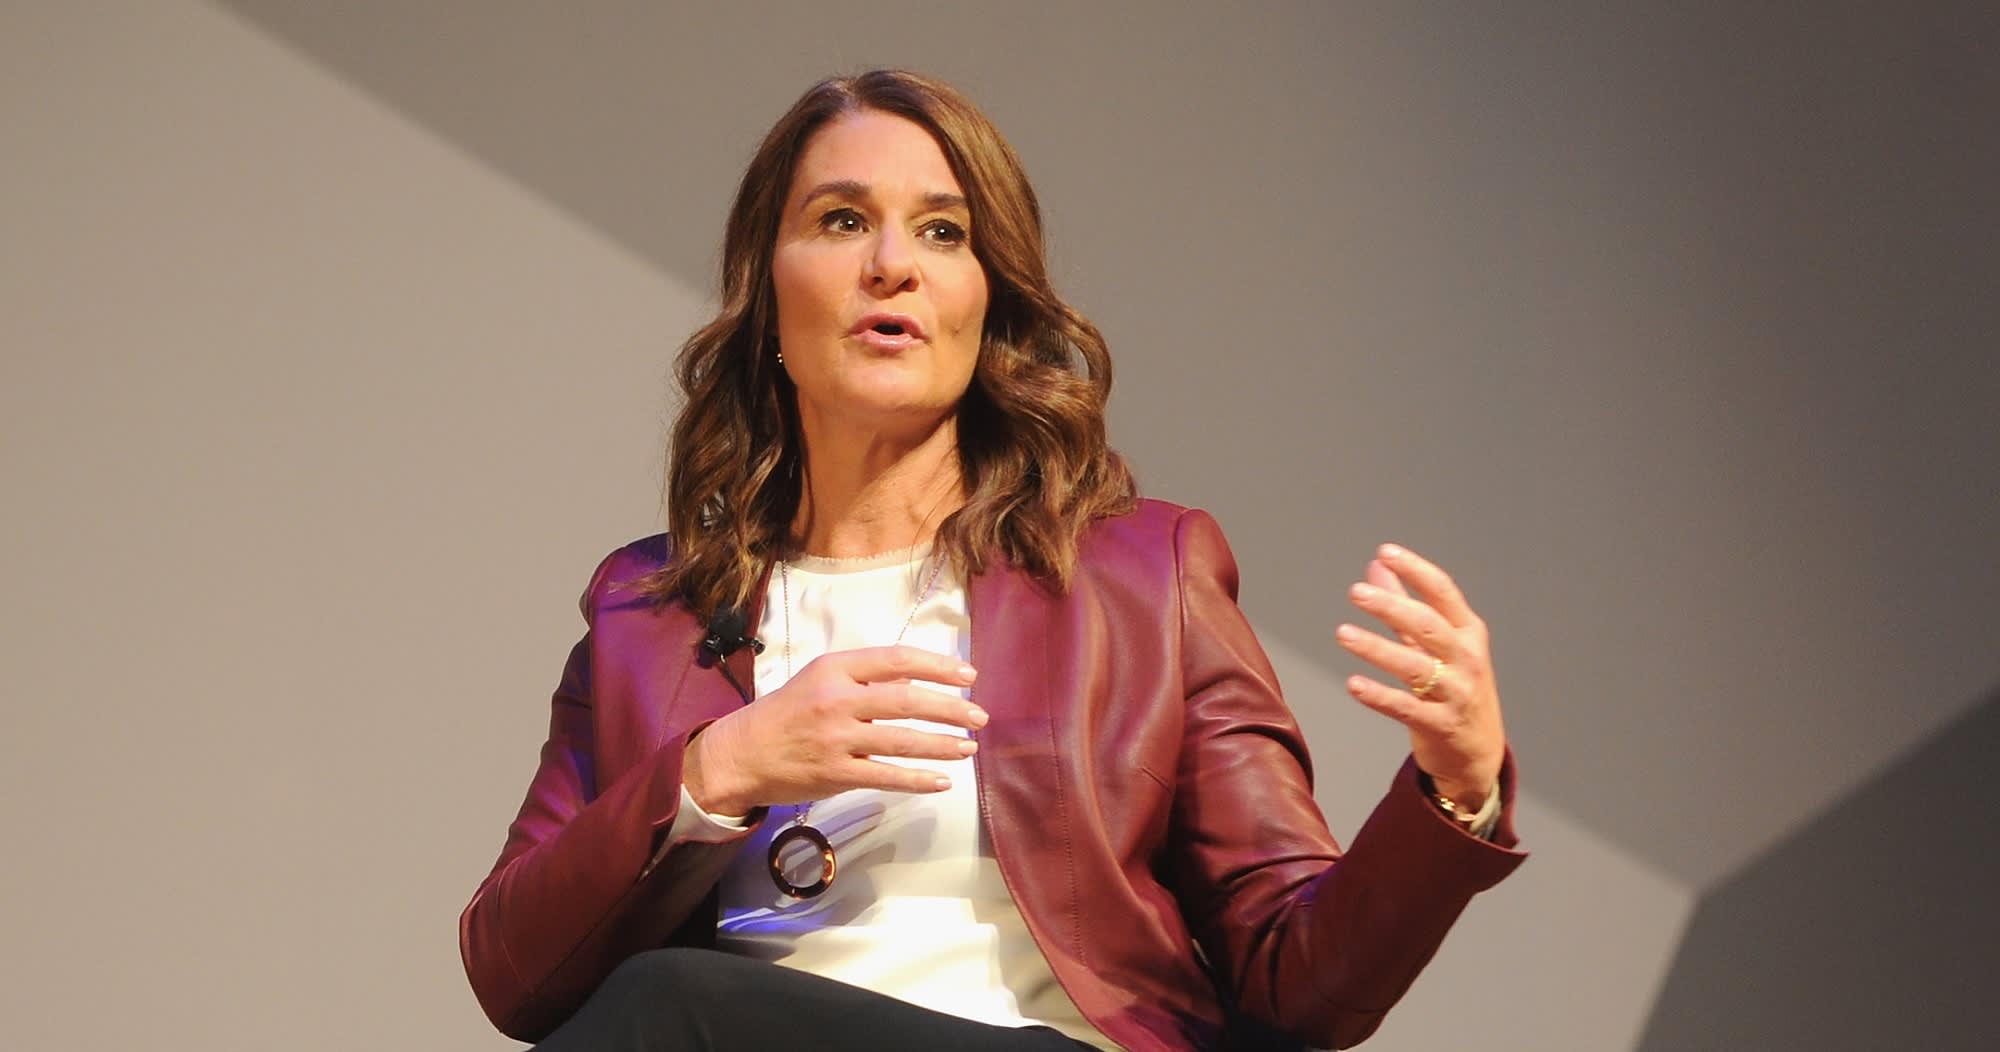 Melinda Gates Appeals to Congress to Grant Paid Family Medical Leave to Help the Economy